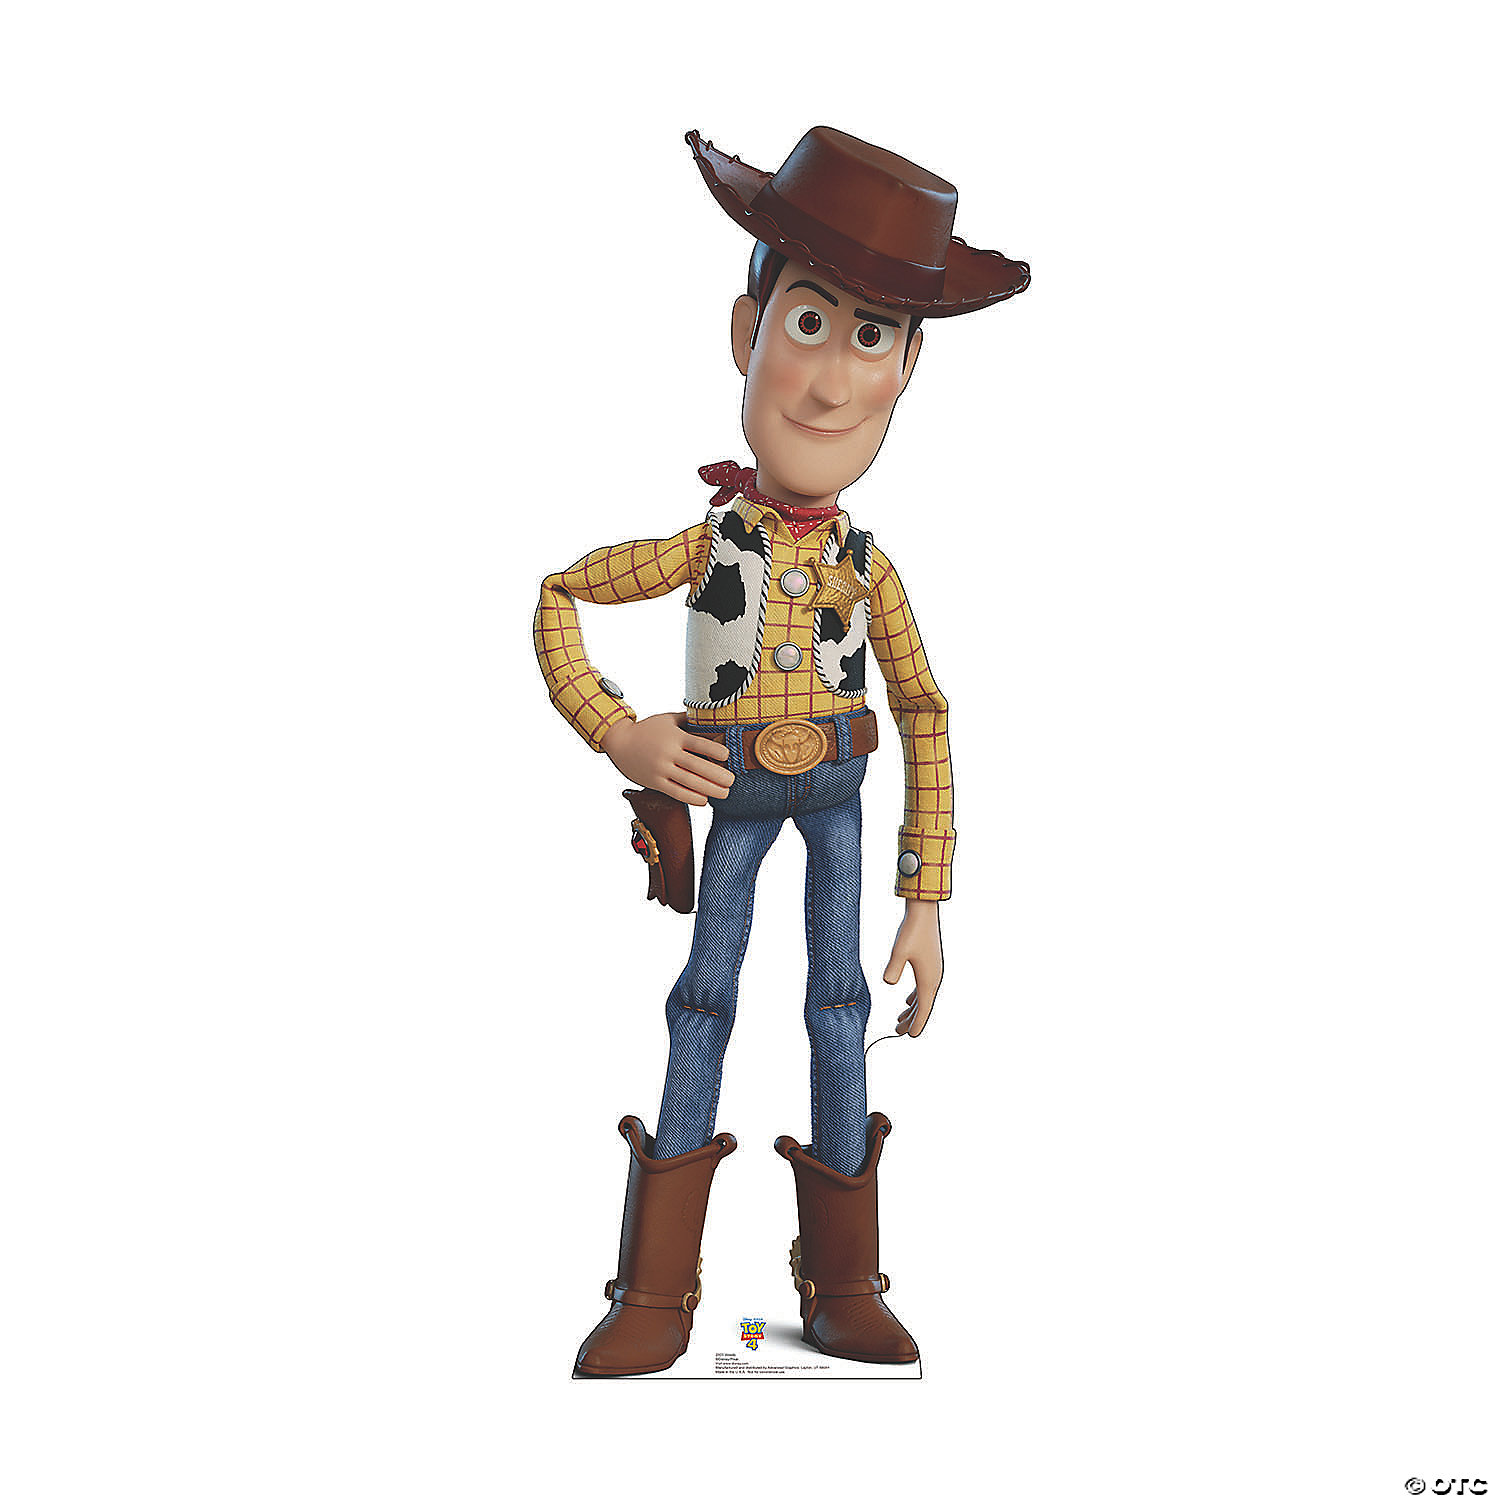 Is Woody Going to Die in 'Toy Story 4'?